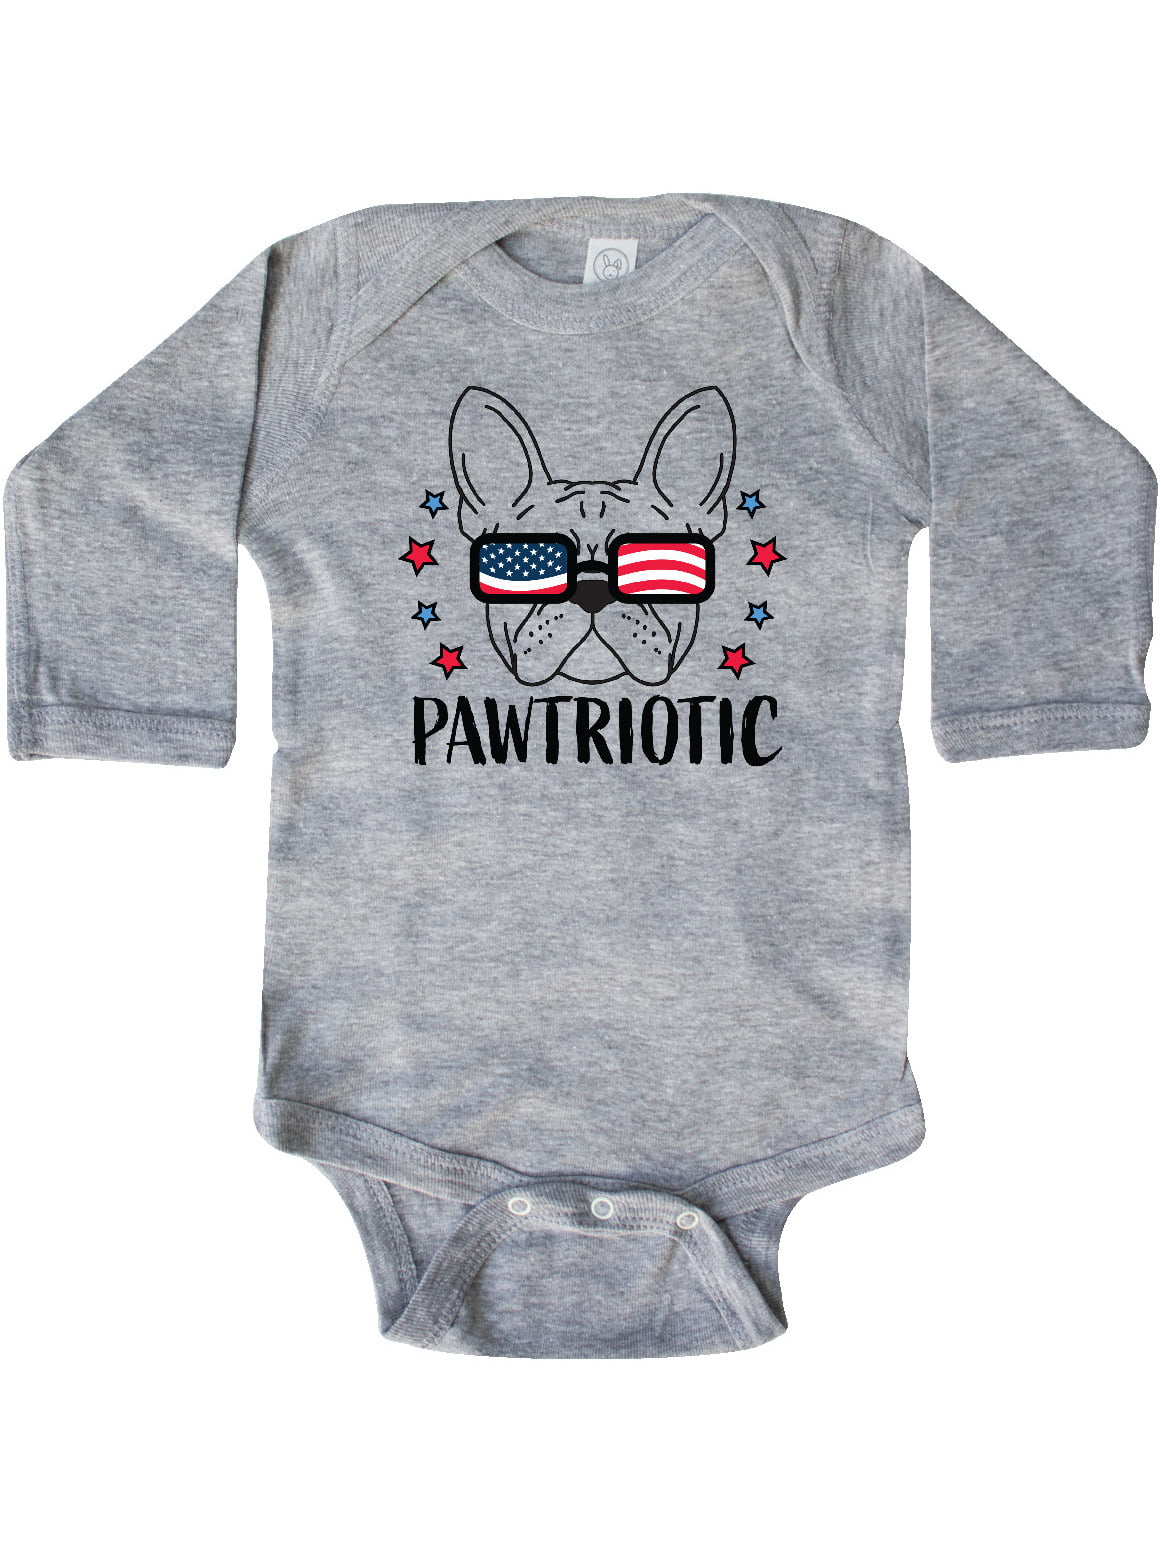 French Bulldog Silhouette Baby Long Sleeves Playsuit Outfit Clothes 